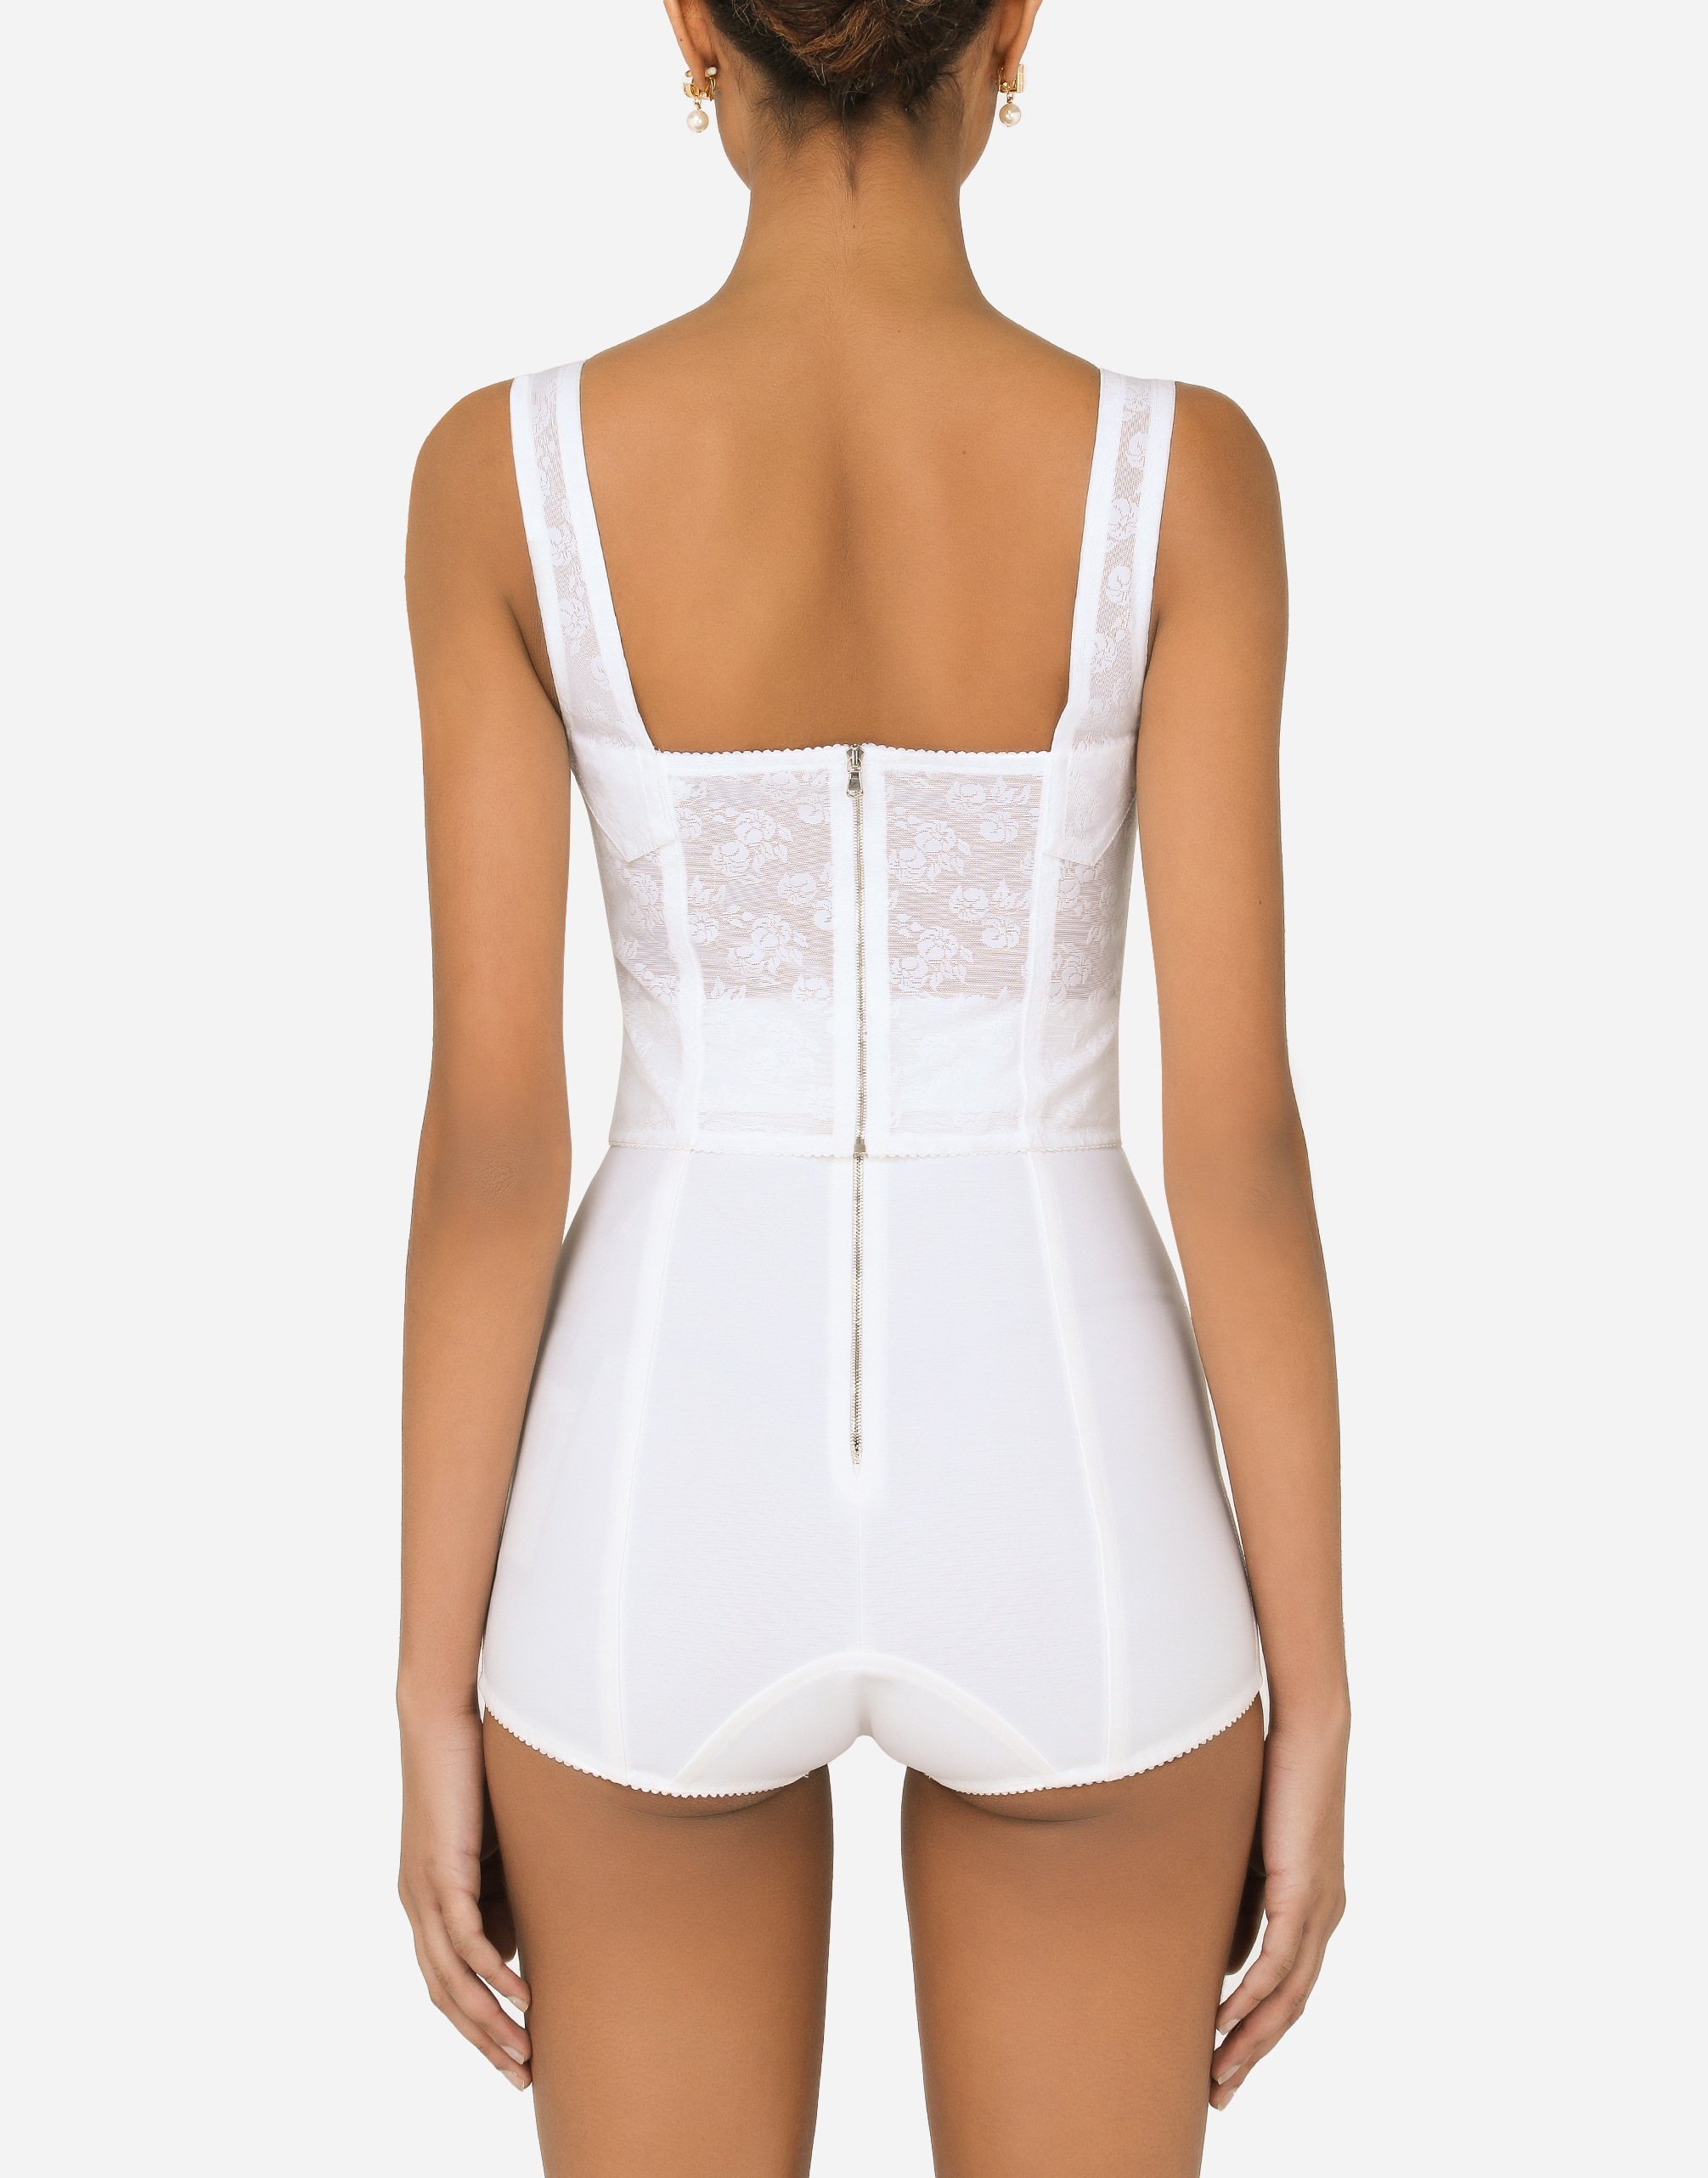 for Dolce&Gabbana® in BUSTIER US White |